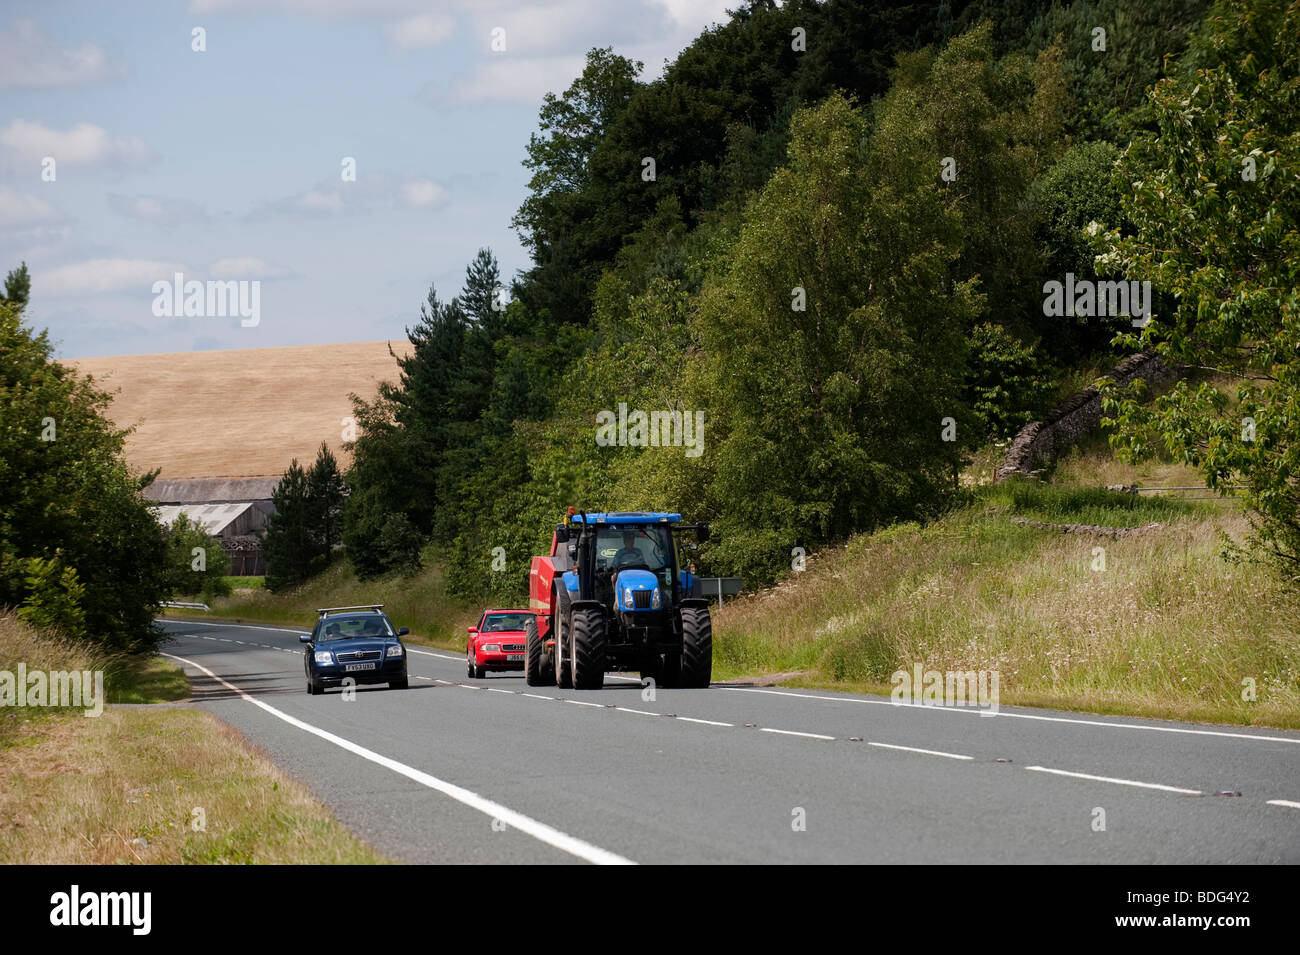 New Holland tractor being overtaken on rural road. Cumbria. Stock Photo